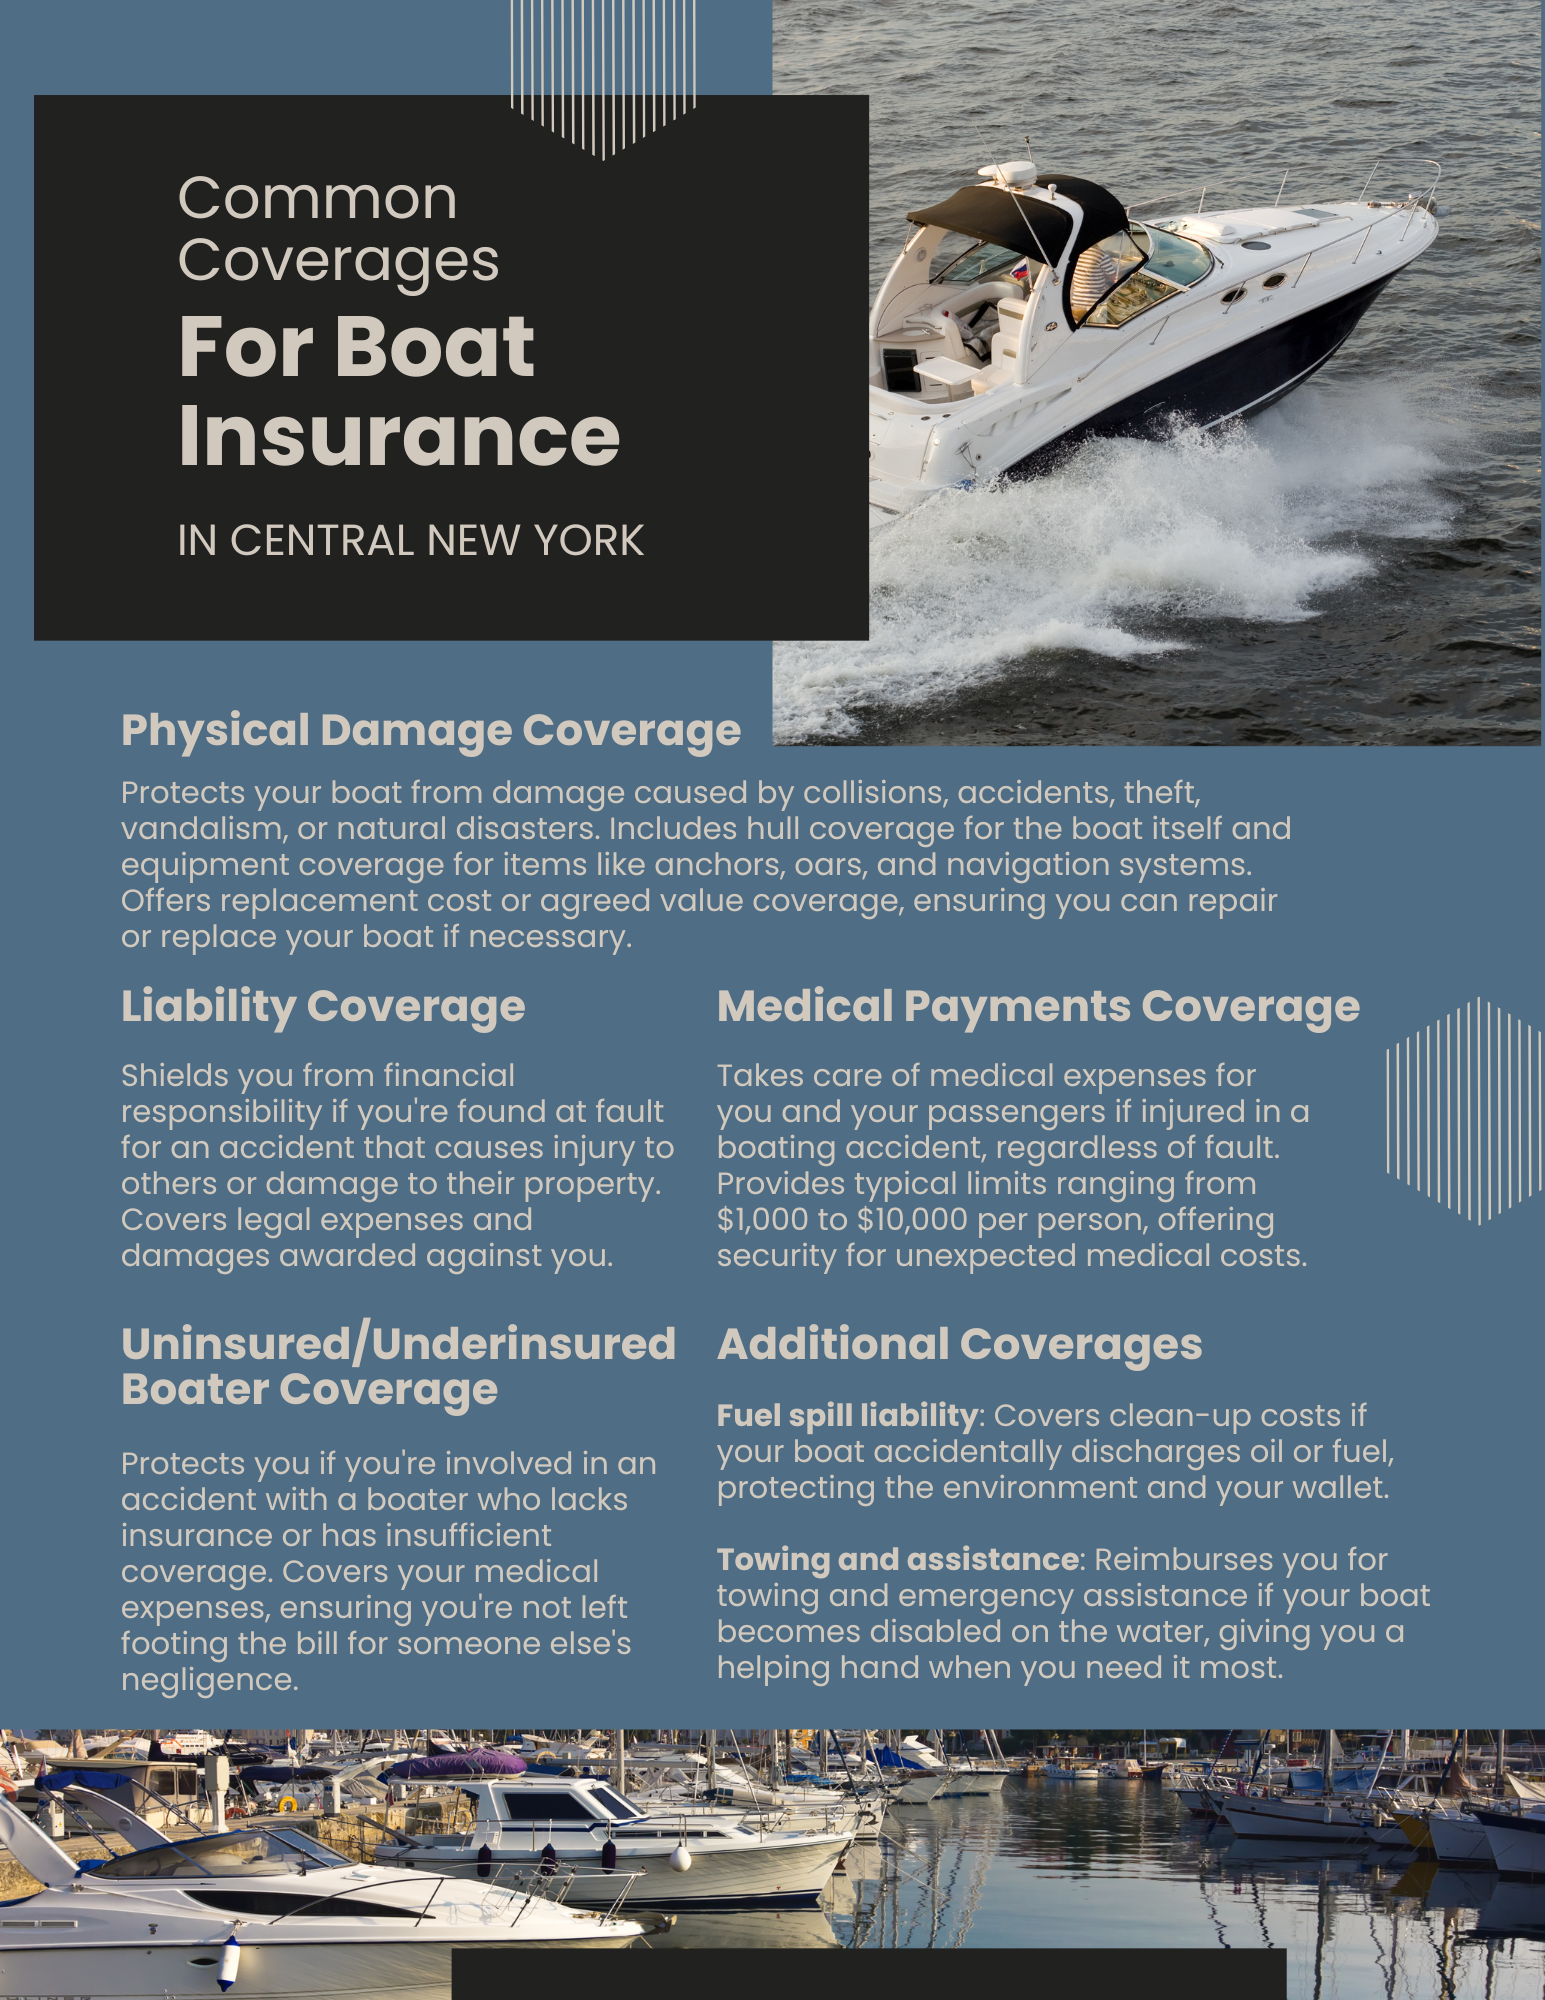 Common coverages for boat insurance in Central New York-1